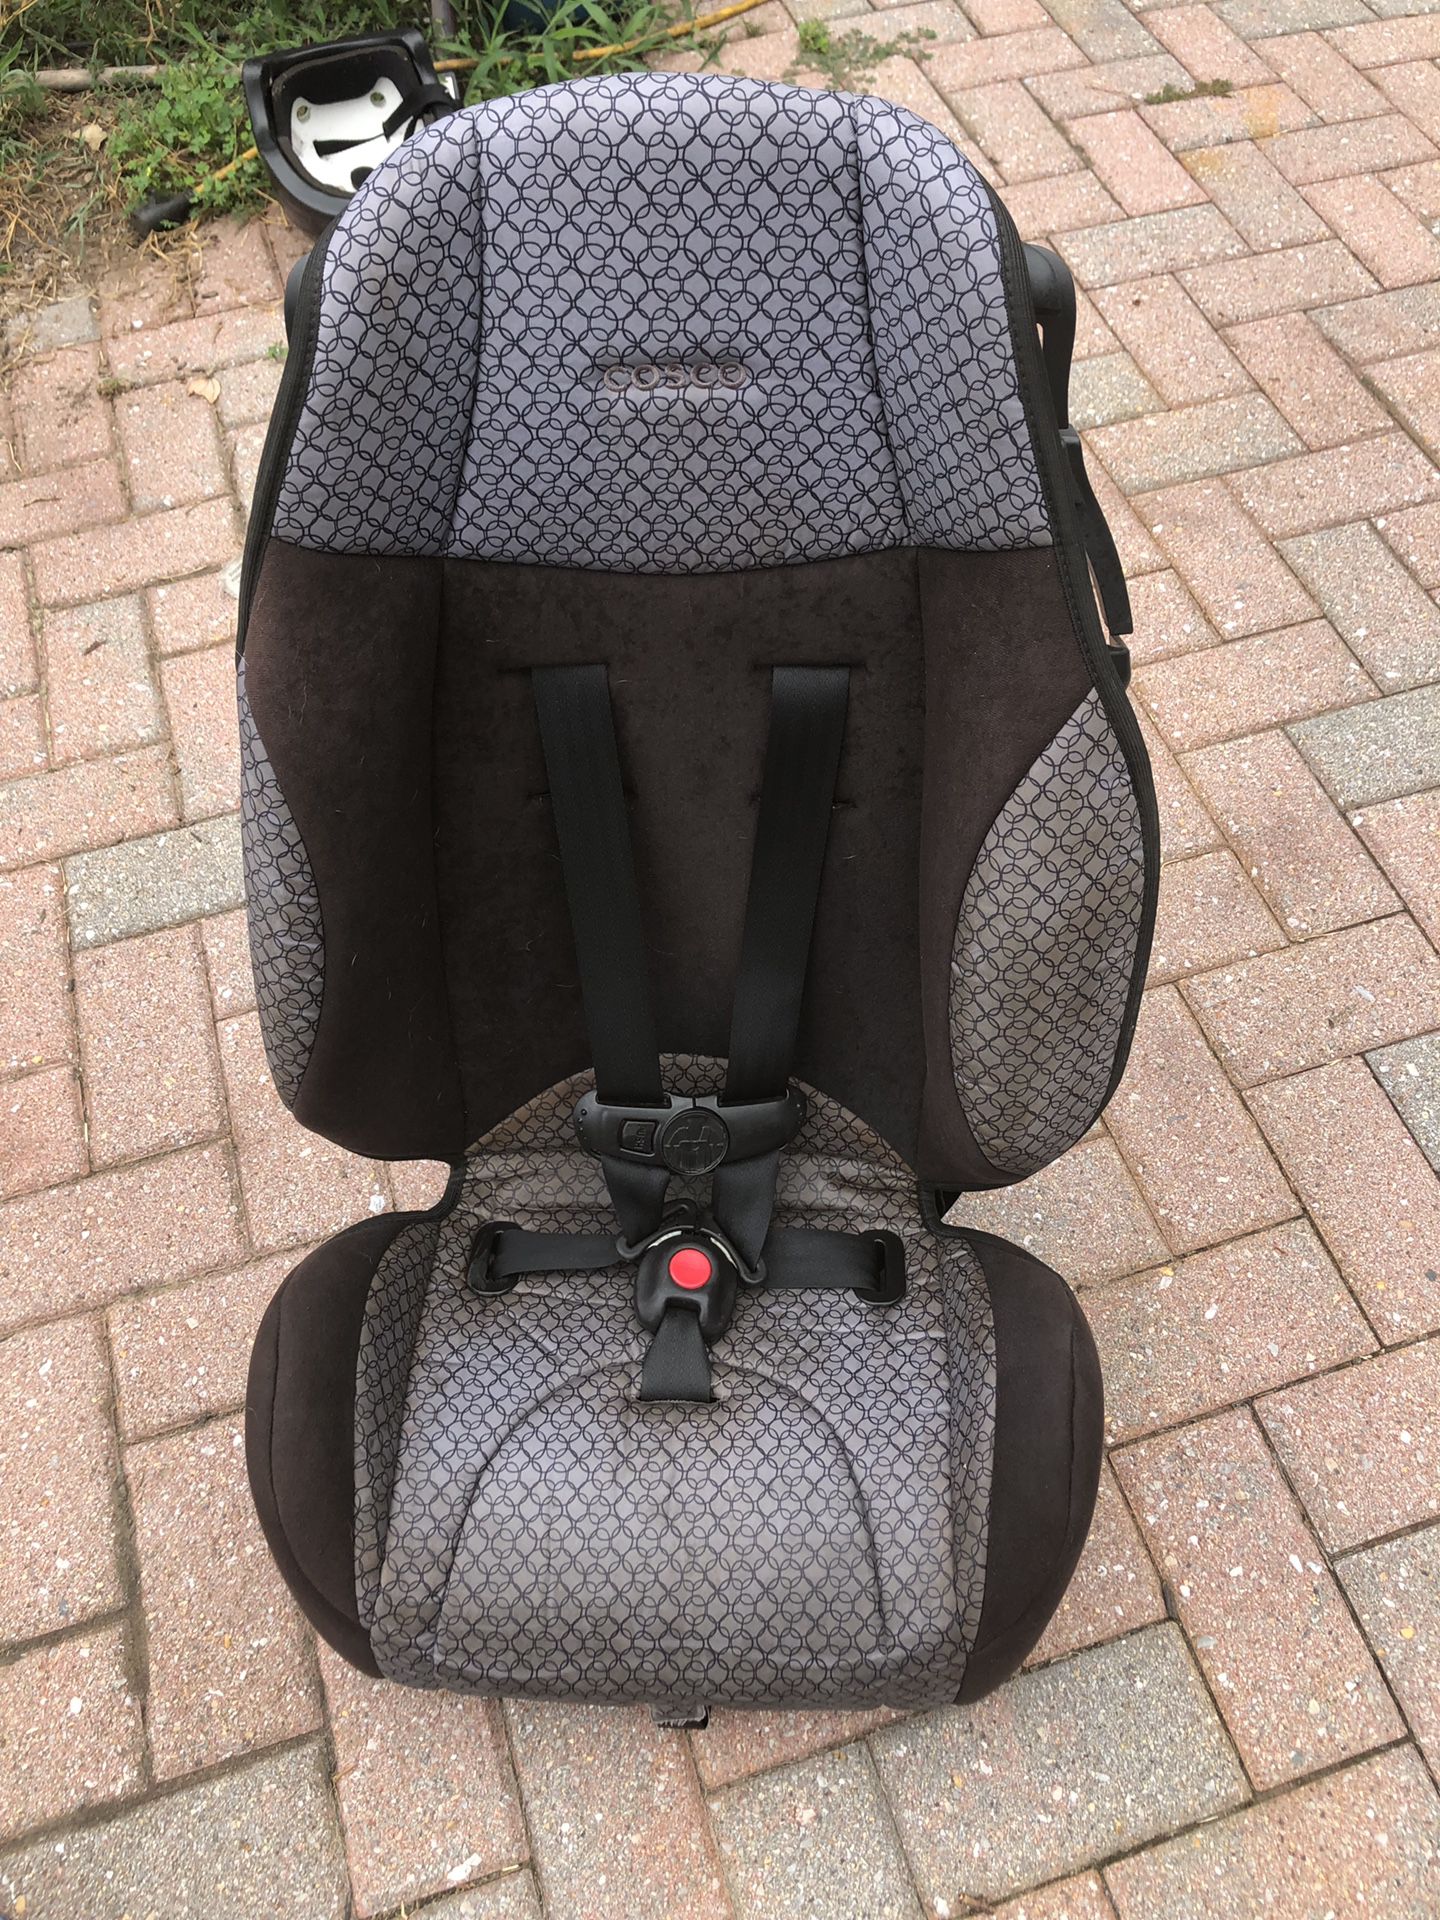 Cosco car seat not outdated